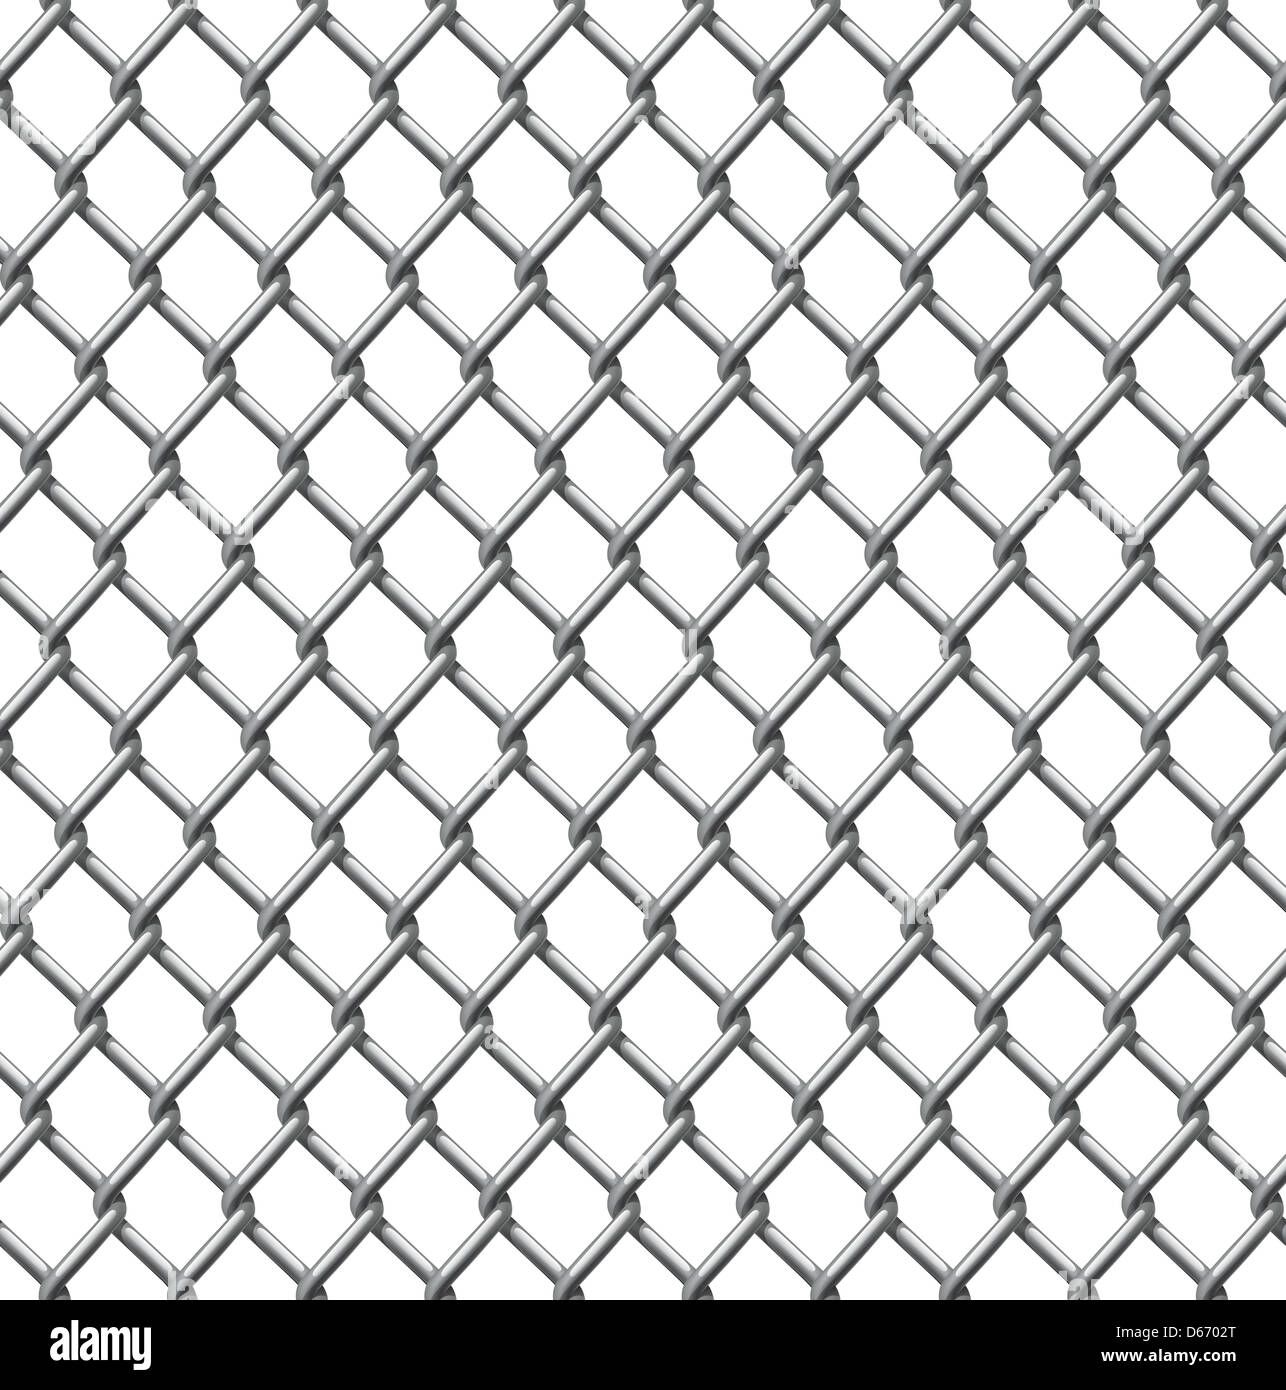 An illustration of a seamlessly tillable chain link fence pattern Stock Photo